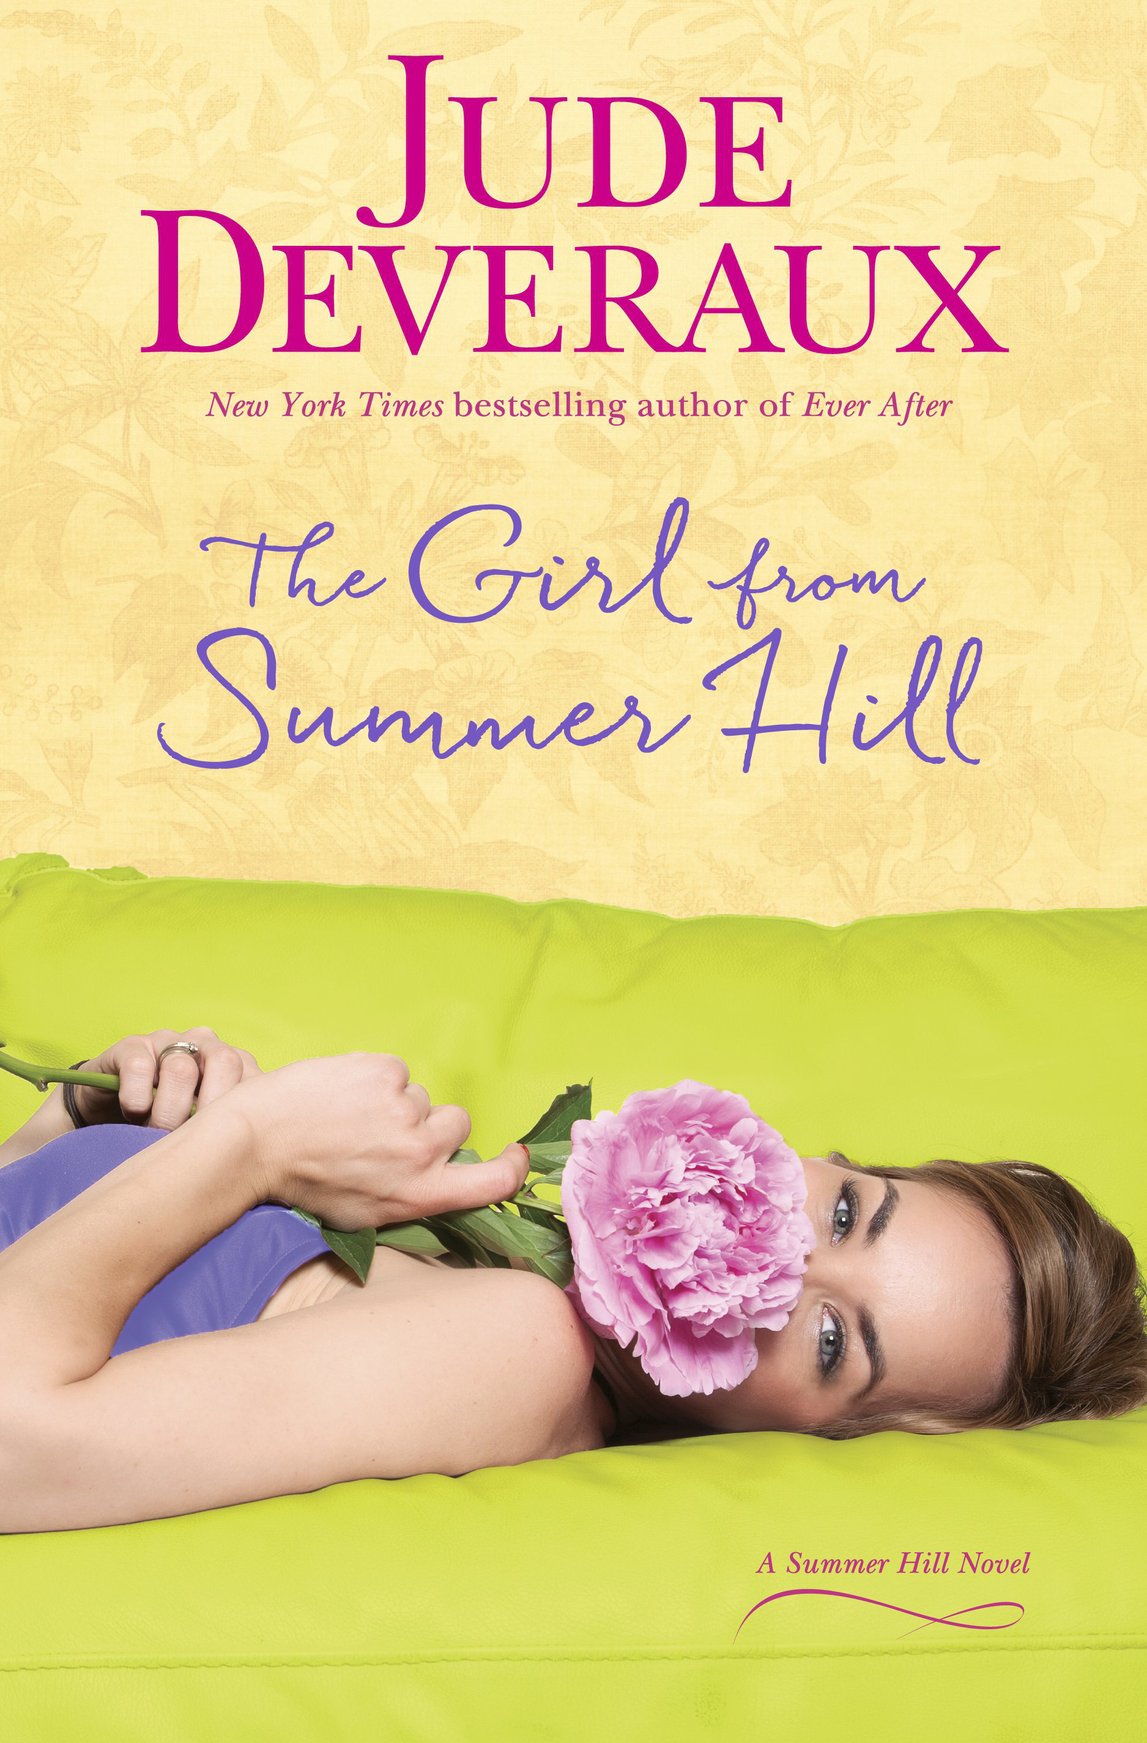 The Girl from Summer Hill (2016) by Jude Deveraux